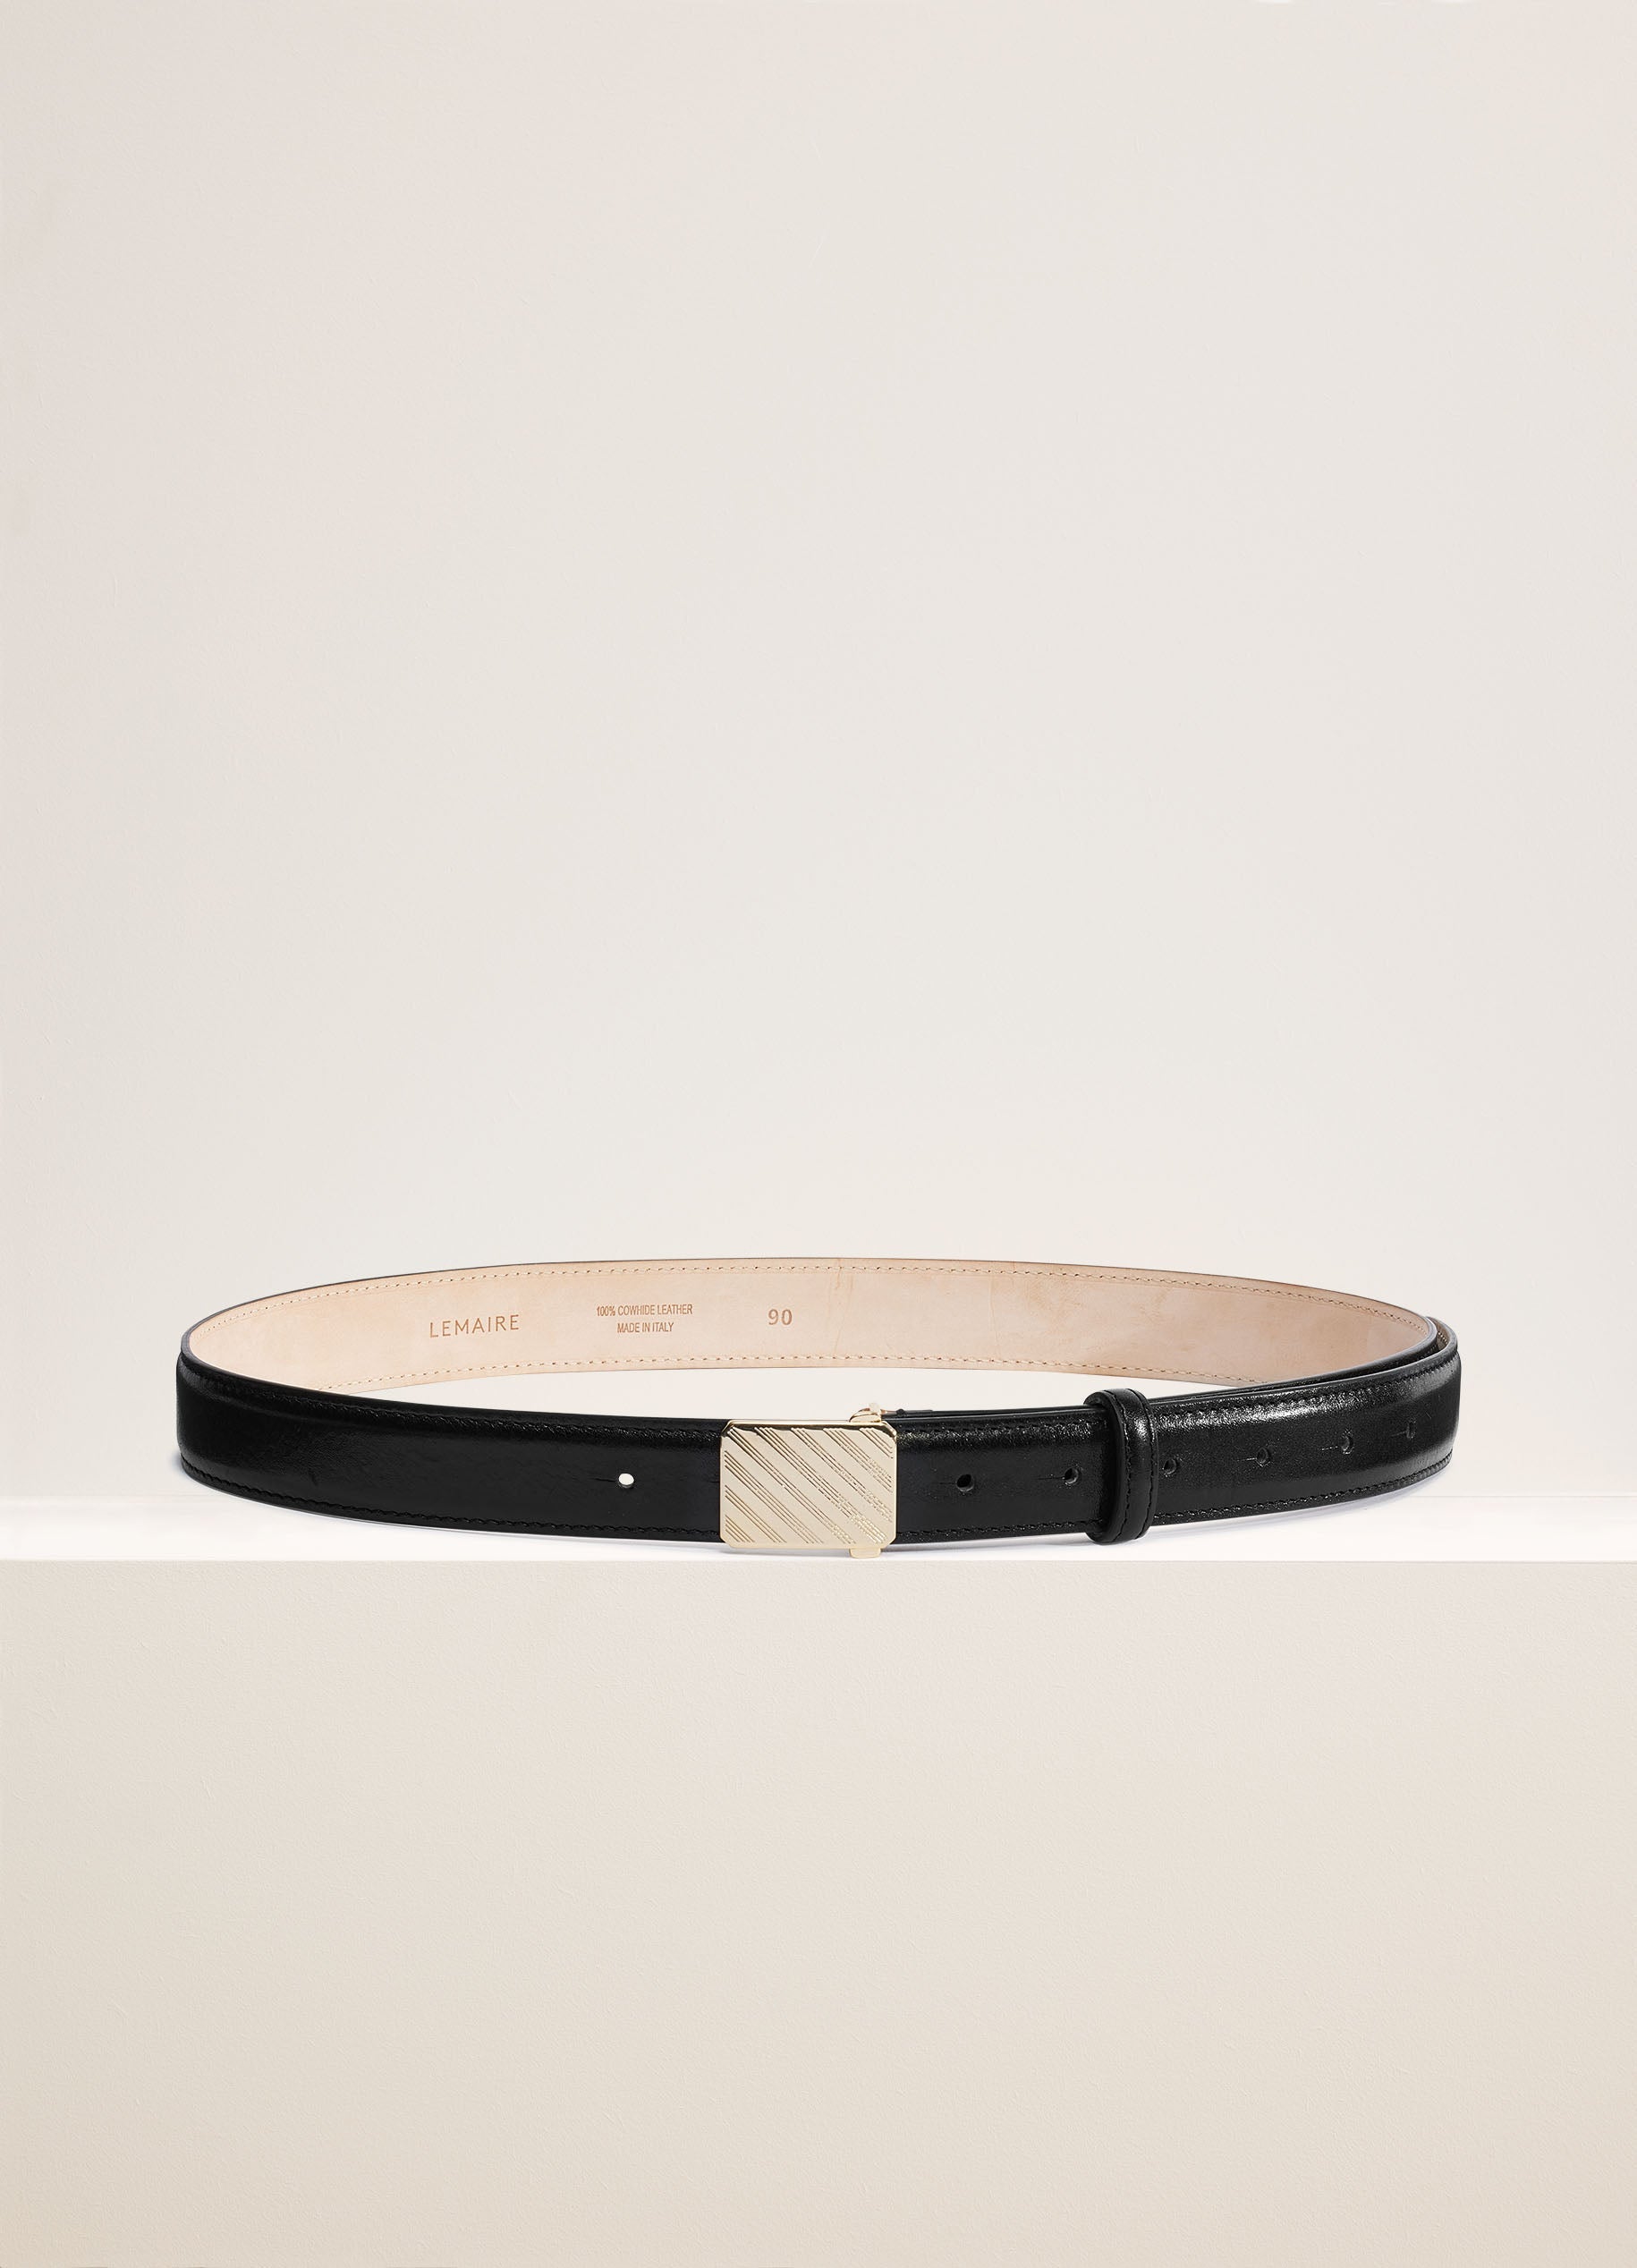 Military Belt, width 15mm, in Black | LEMAIRE